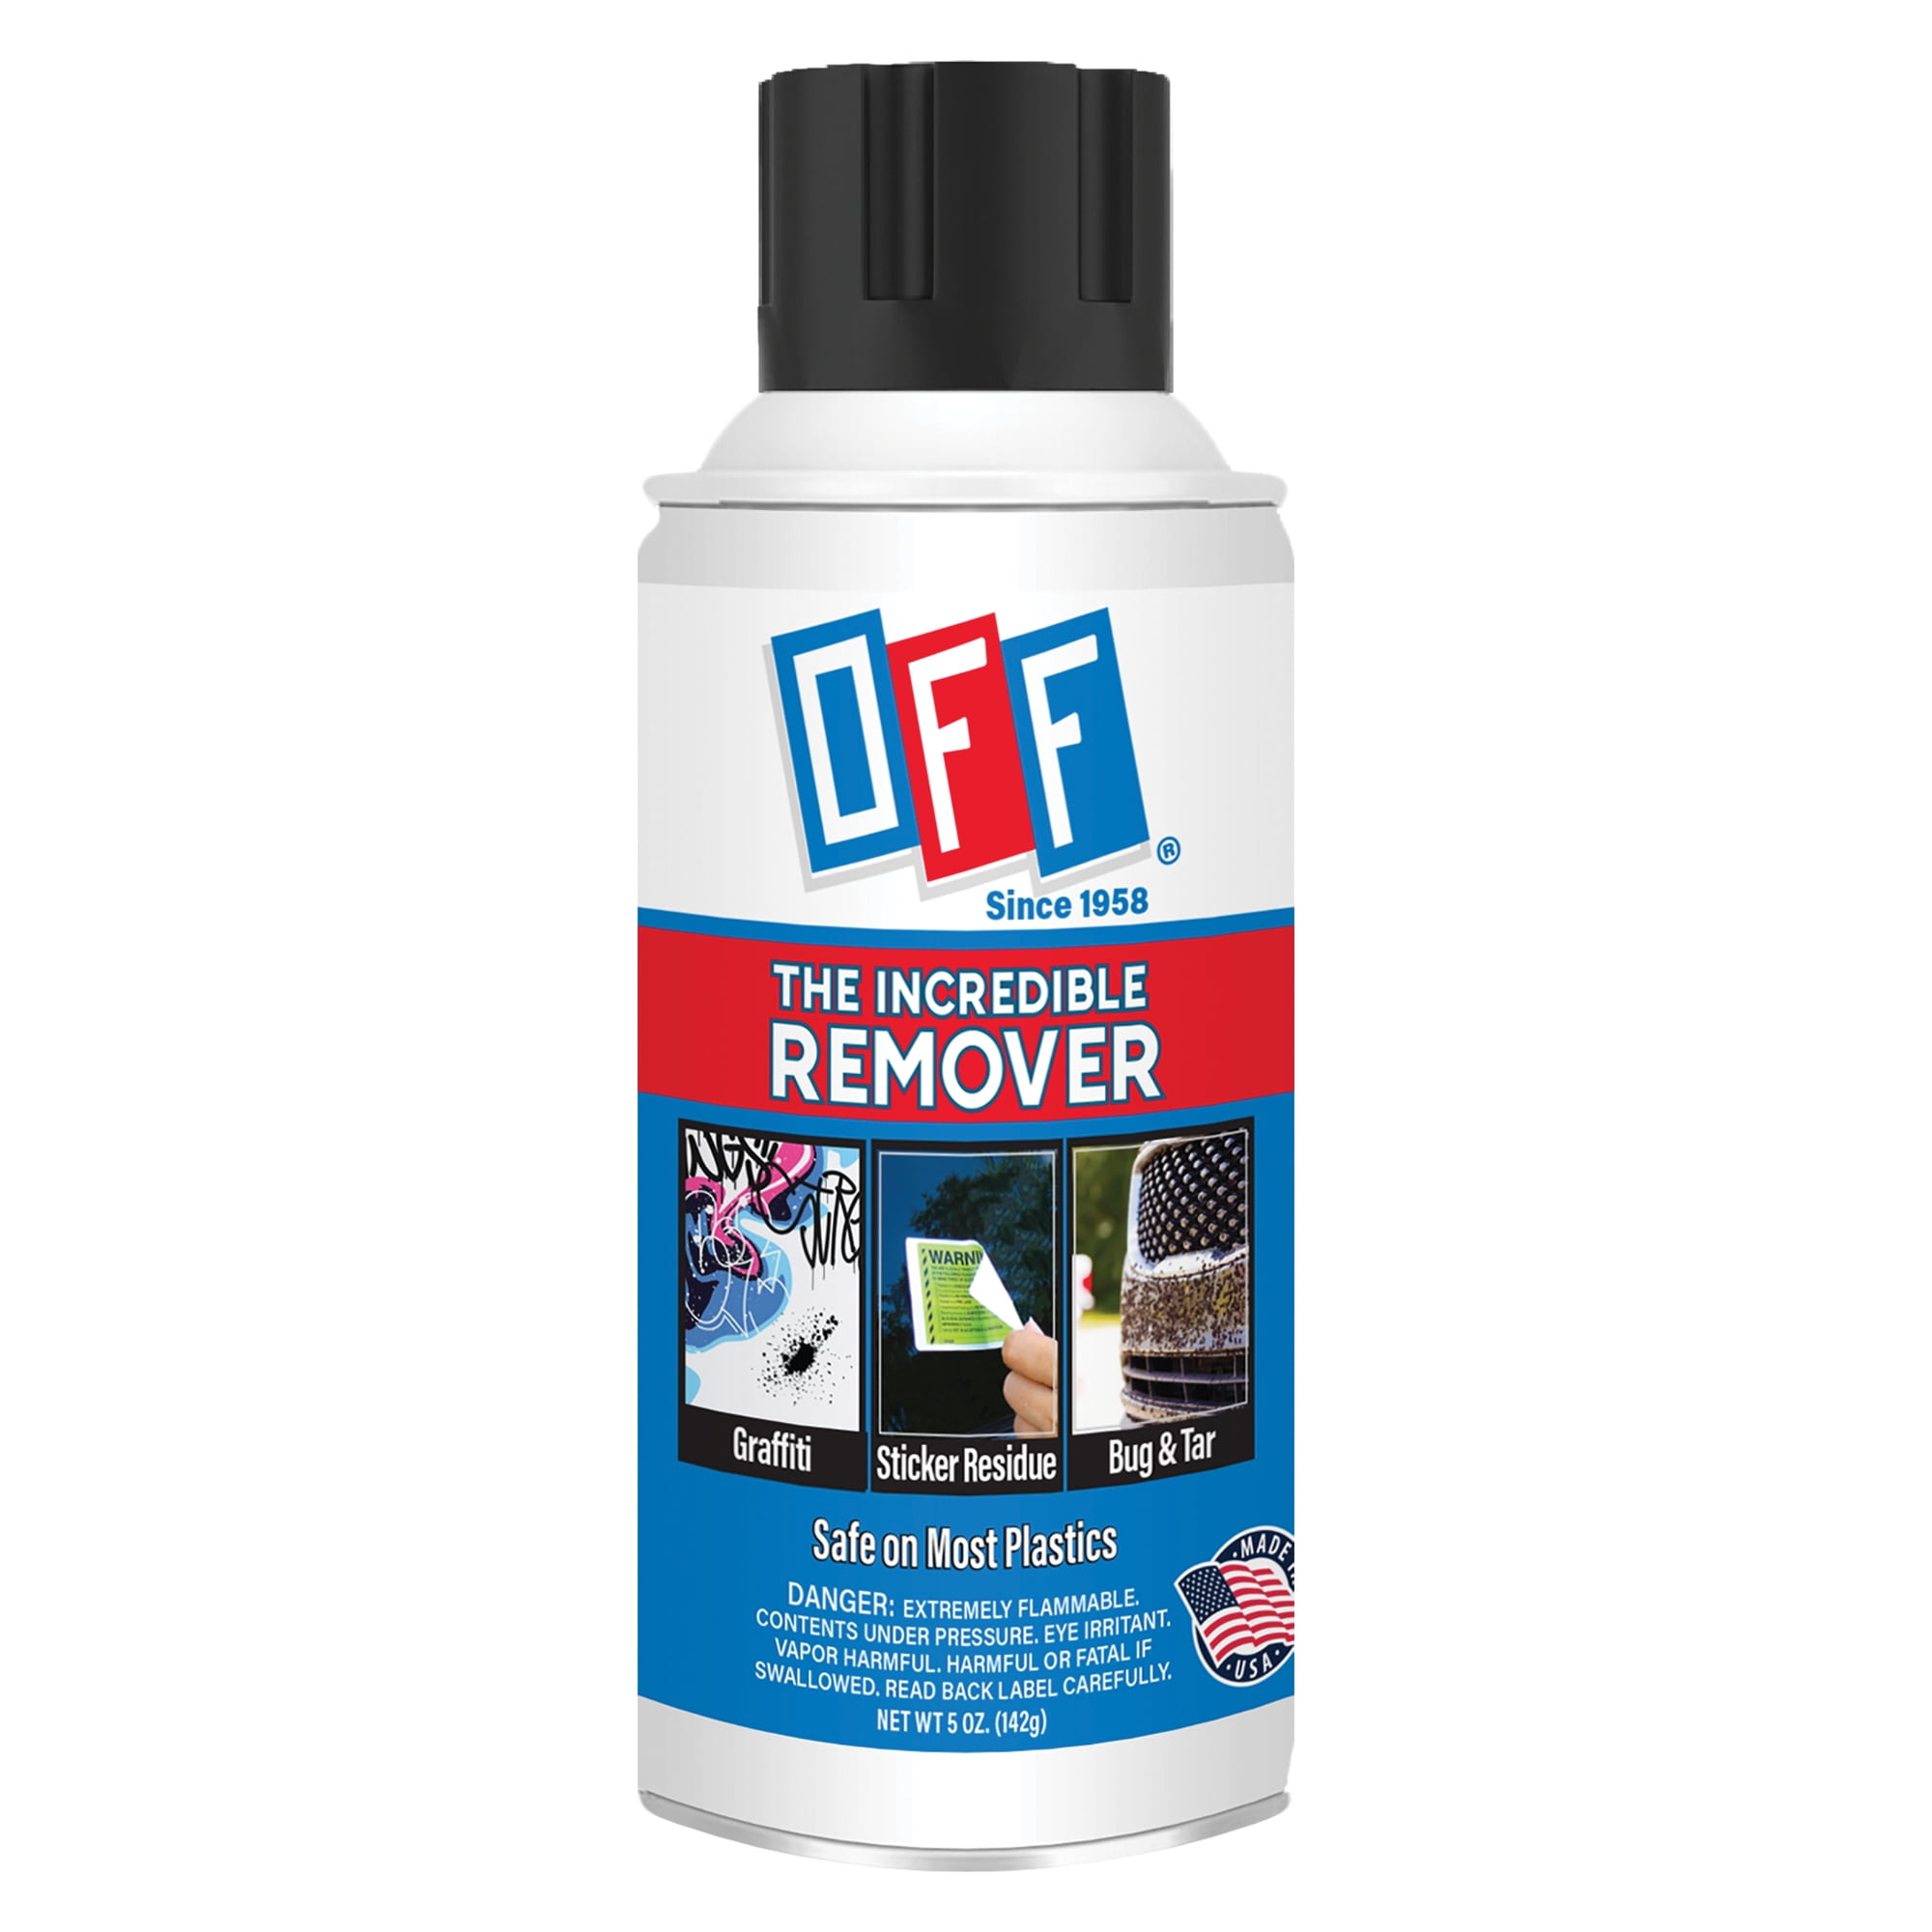 TakeOFF ADHESIVE REMOVER 4 oz. Bottle Professional Strength Household  Adhesive/Glue Remover for Removing Every Sticky, Greasy, Gooey Mess  D-TOBTL-04 